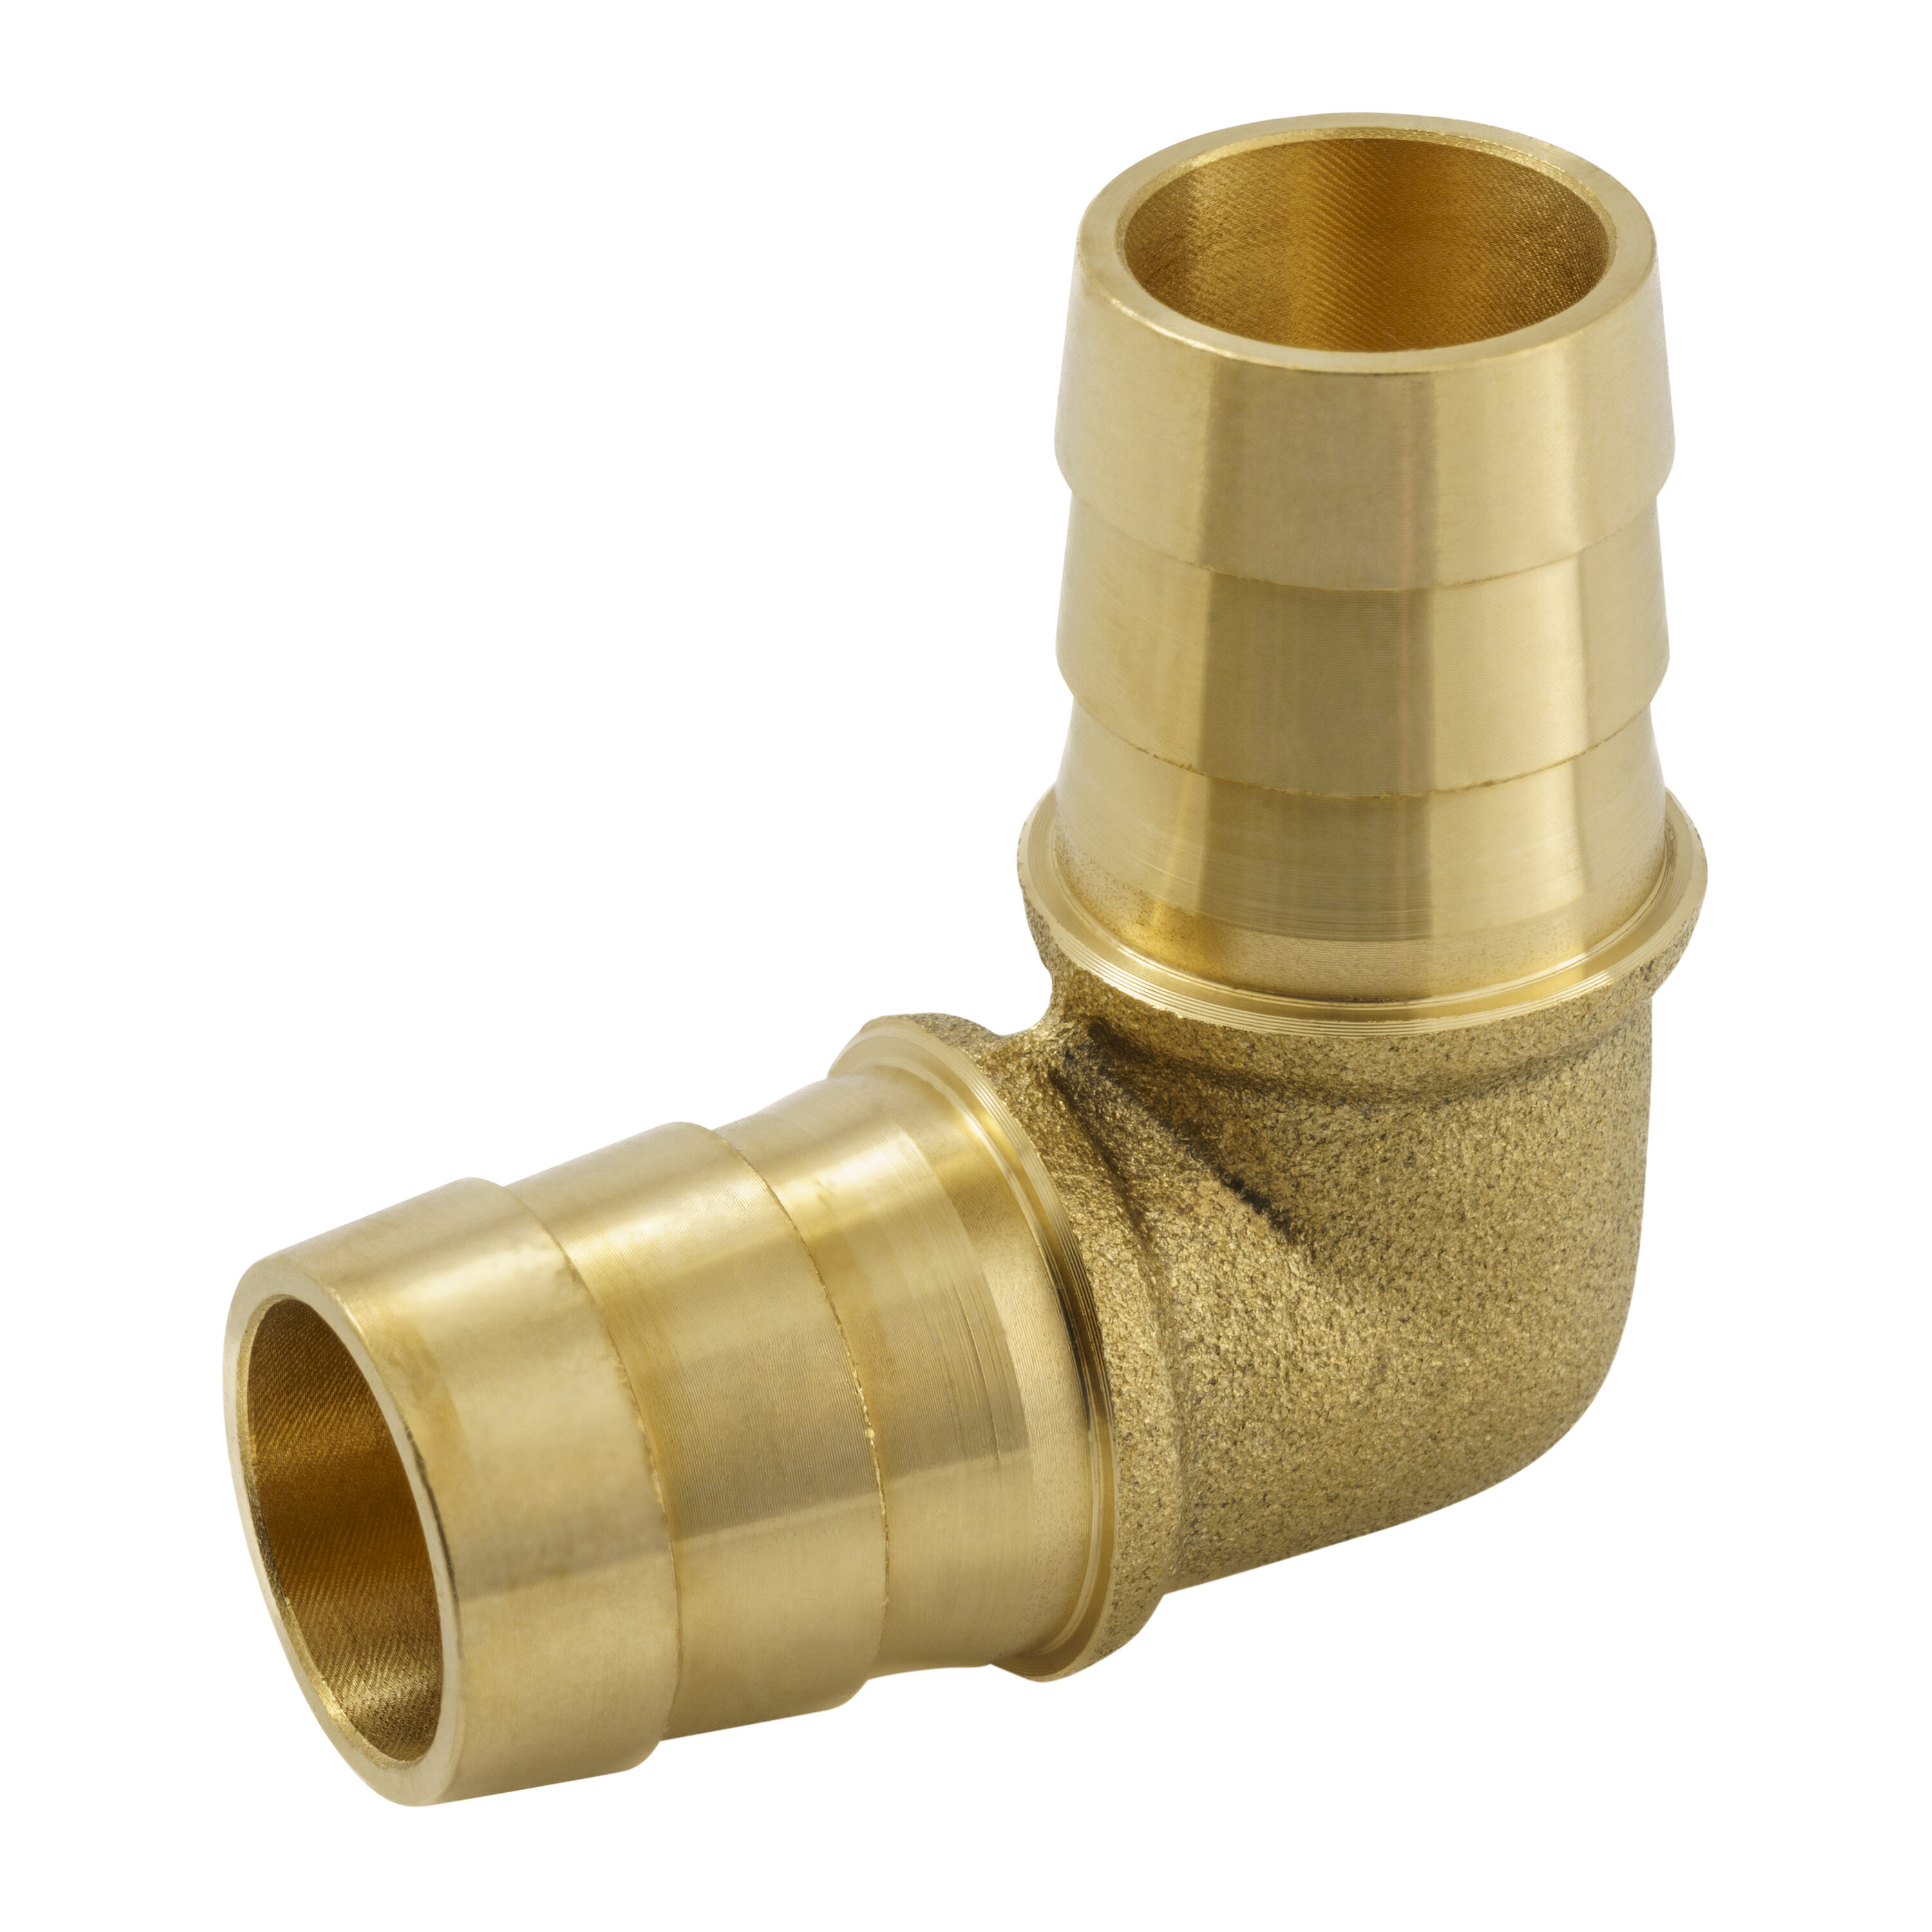 Brass Fitting Female 90° Elbow Hose Barb Fitting